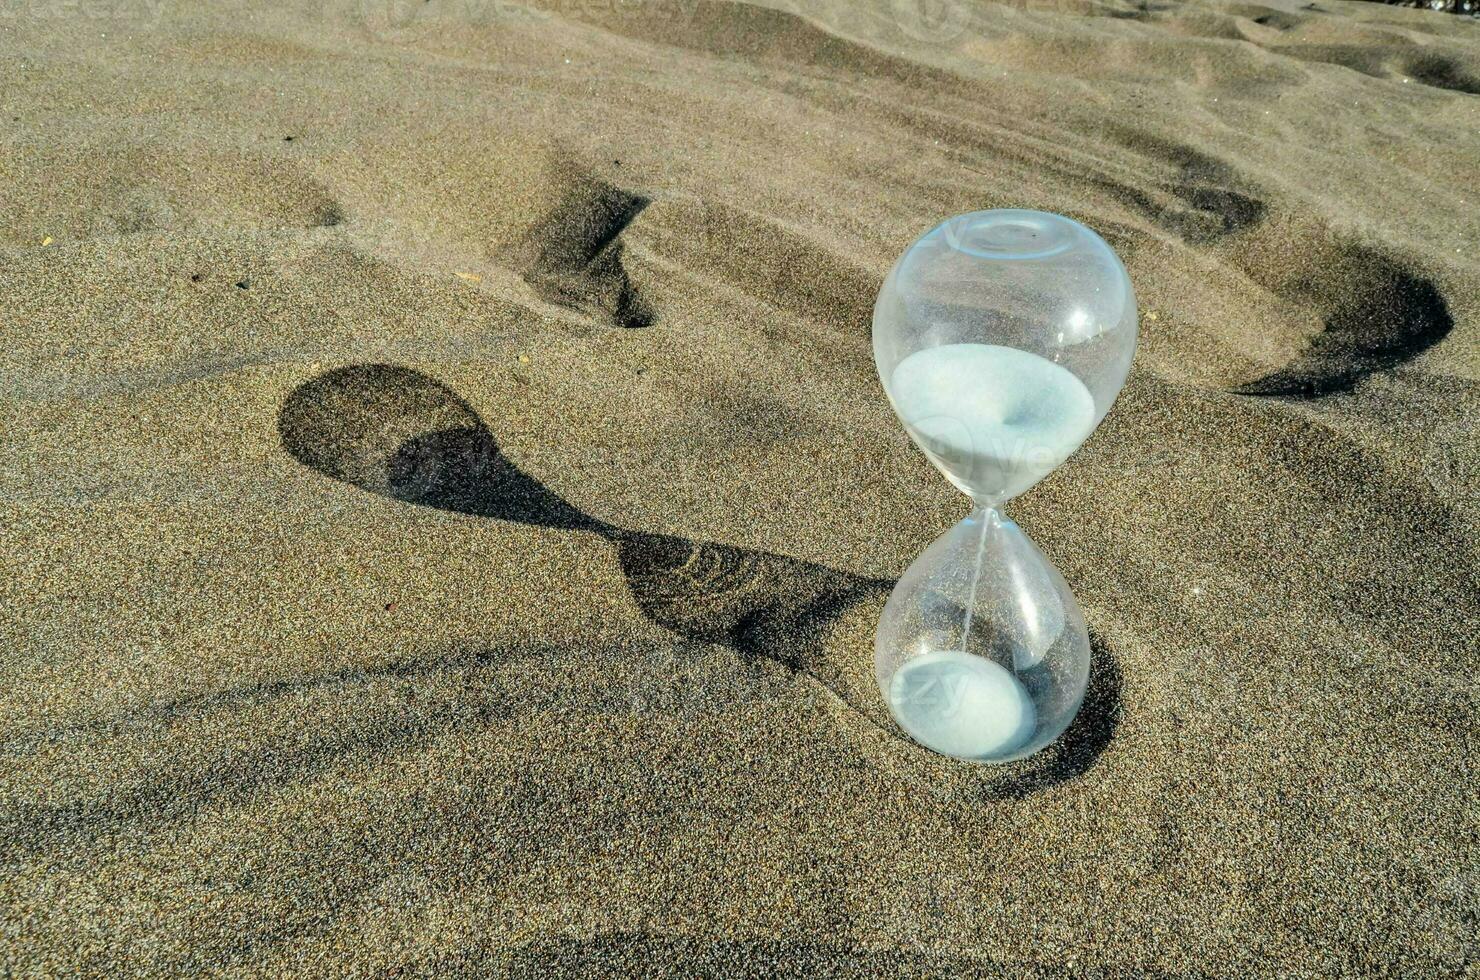 an hourglass sitting on the sand in the middle of the sand photo